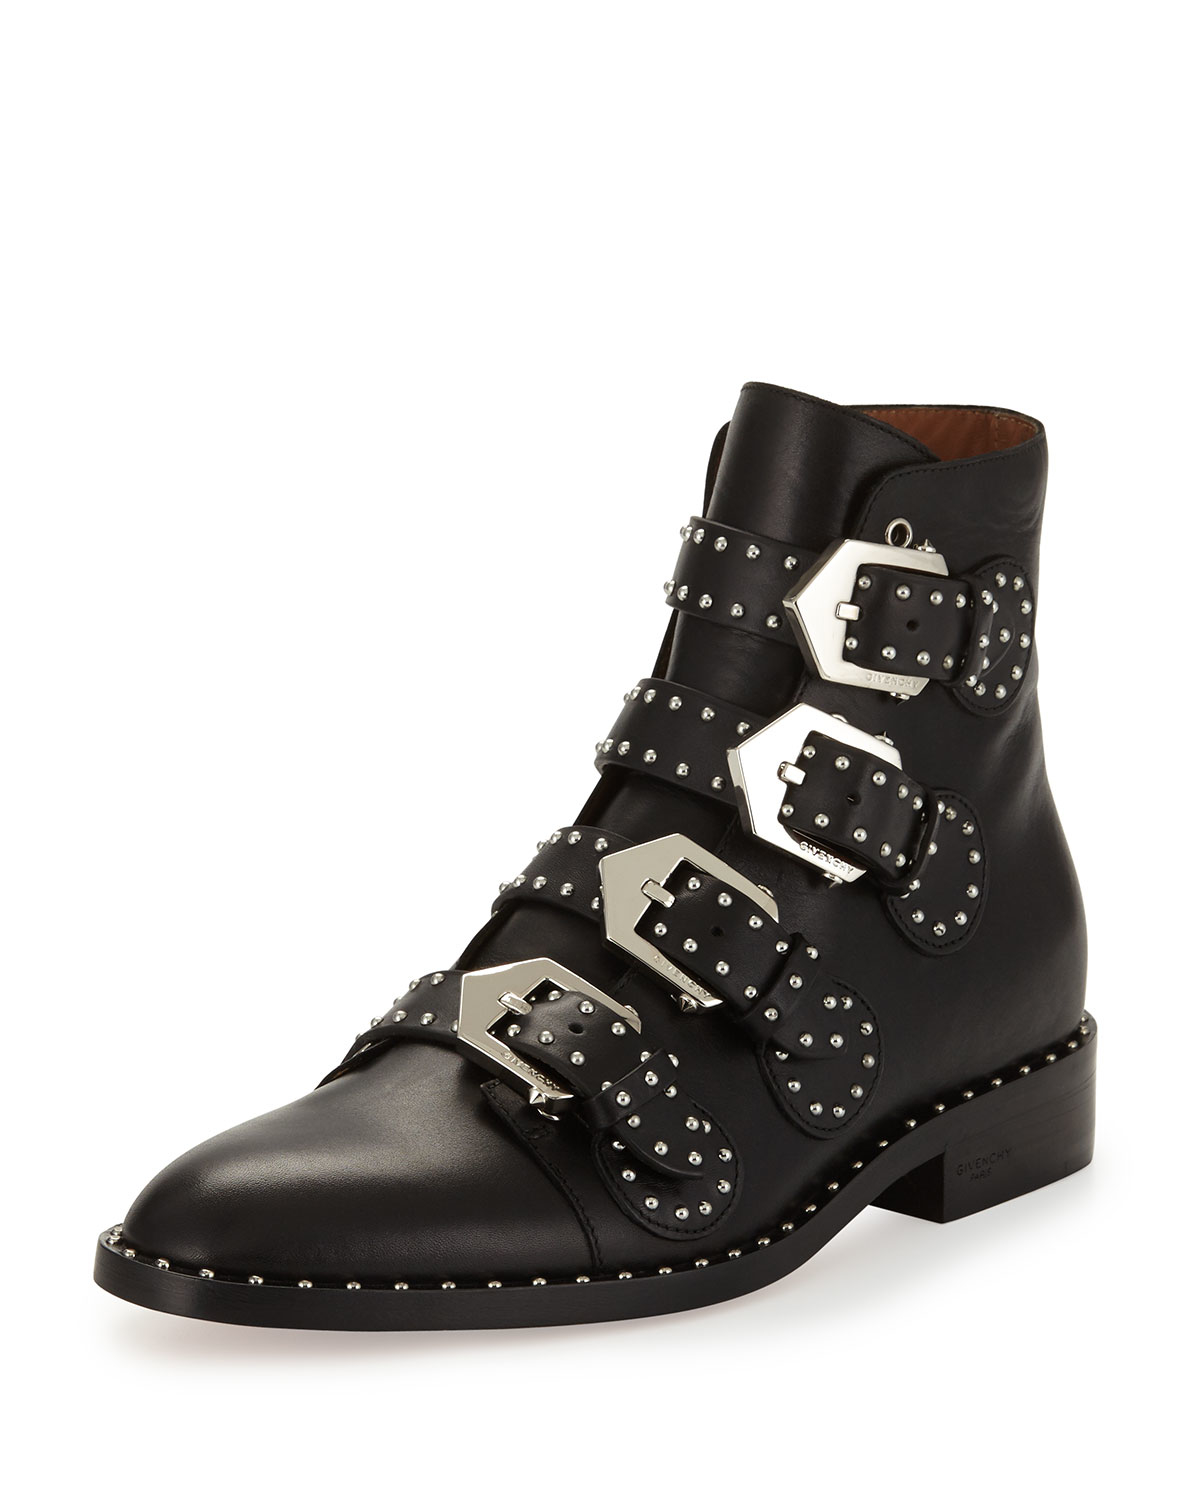 Givenchy Studded Leather Ankle Boot in Black | Lyst